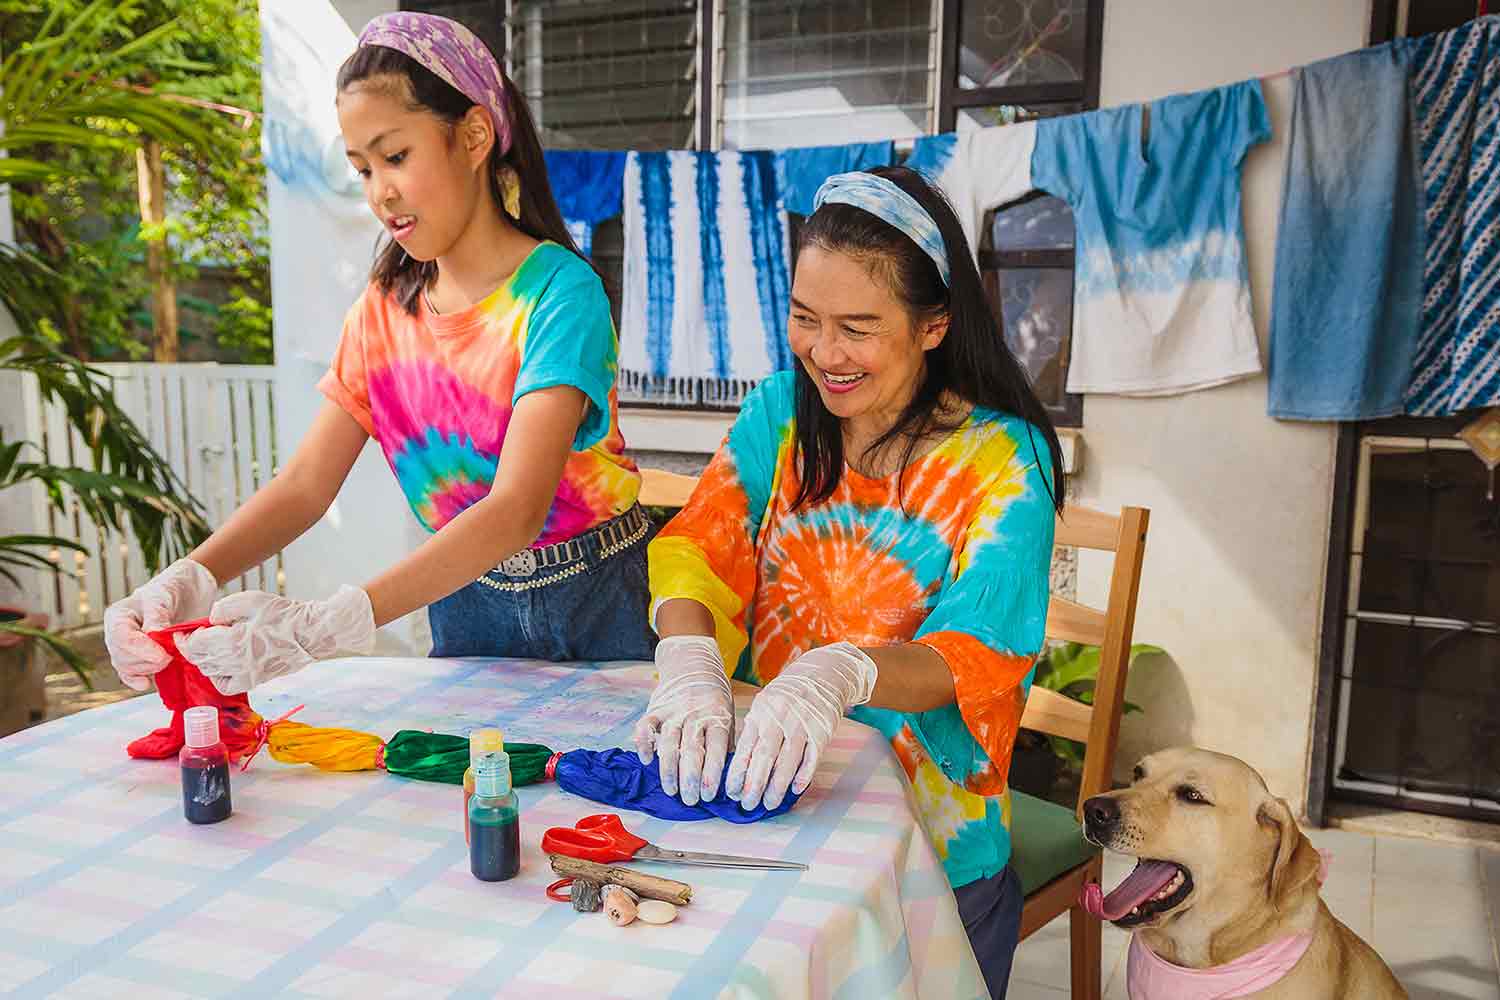 A woman and a girl dying a rolled and banded shirt with tie dyed clothing hanging in the background.